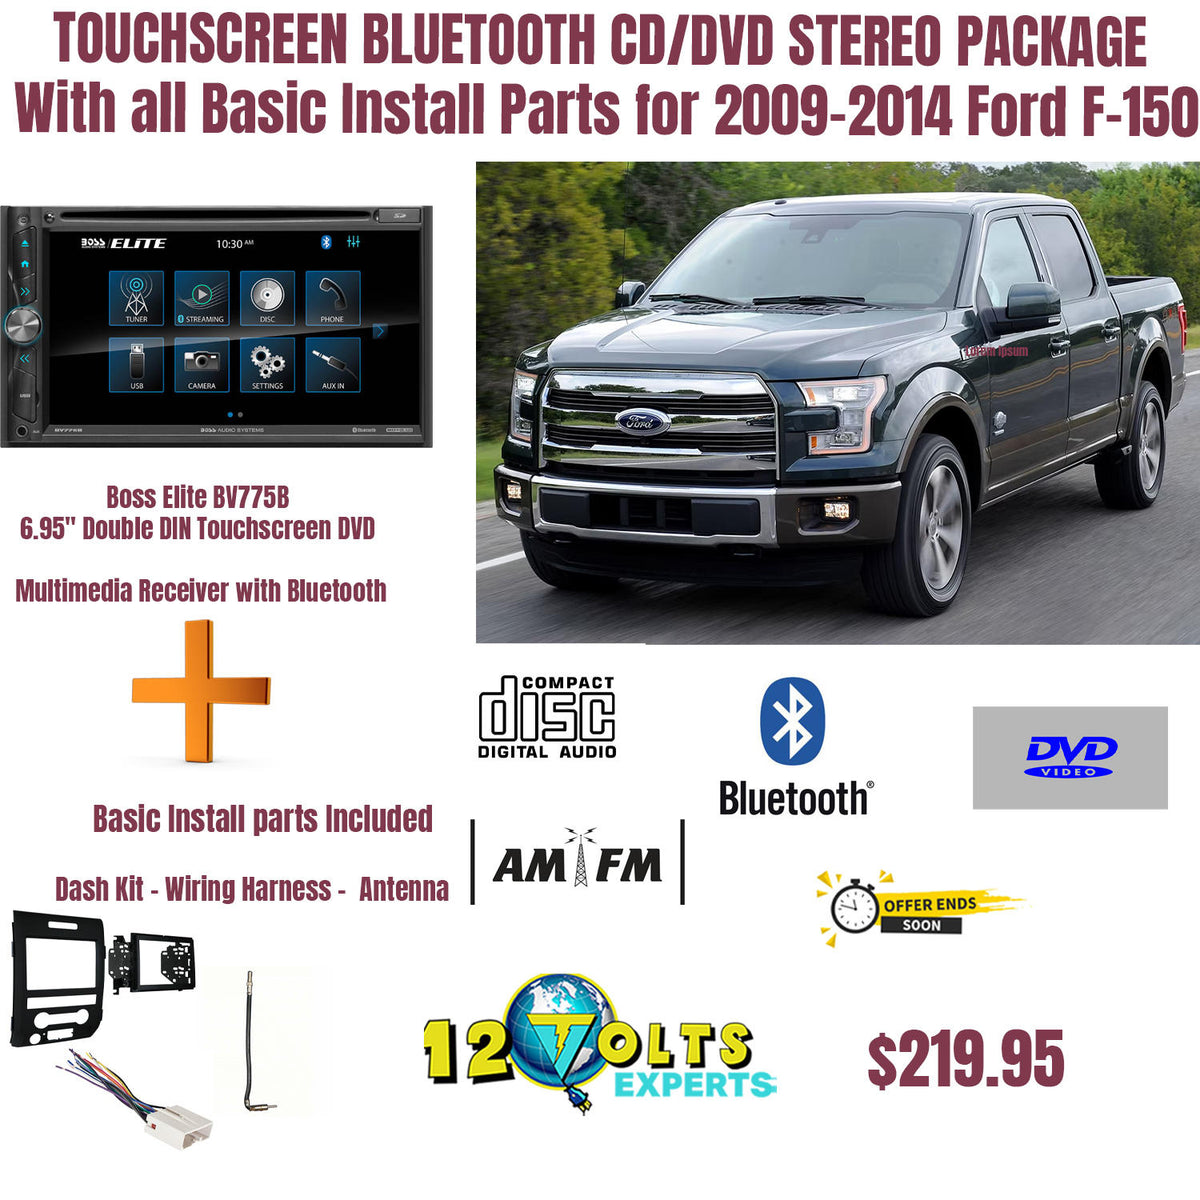 TOUCHSCREEN BLUETOOTH CD/DVD STEREO PACKAGE  With all Basic Install Parts for 2009-2014 Ford F-150